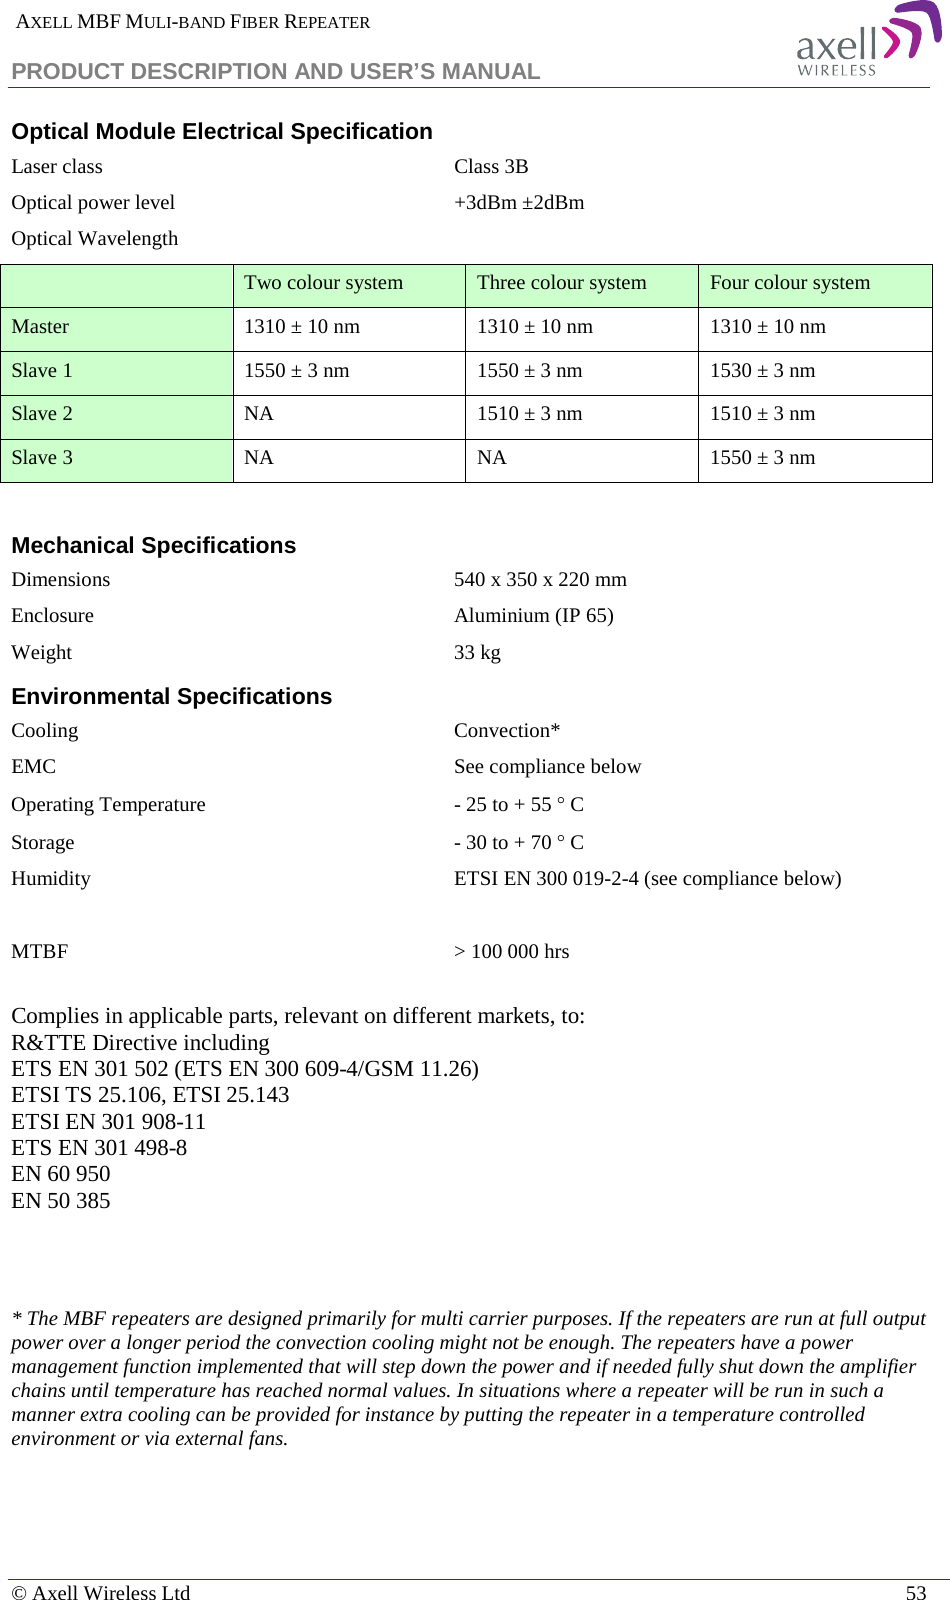  AXELL MBF MULI-BAND FIBER REPEATER PRODUCT DESCRIPTION AND USER’S MANUAL   © Axell Wireless Ltd    53 Optical Module Electrical Specification  Laser class Class 3B Optical power level  +3dBm ±2dBm Optical Wavelength  Two colour system Three colour system Four colour system Master 1310 ± 10 nm 1310 ± 10 nm 1310 ± 10 nm Slave 1 1550 ± 3 nm 1550 ± 3 nm 1530 ± 3 nm Slave 2 NA 1510 ± 3 nm 1510 ± 3 nm Slave 3 NA NA 1550 ± 3 nm  Mechanical Specifications Dimensions                                                   540 x 350 x 220 mm Enclosure                                                             Aluminium (IP 65) Weight                                                                       33 kg Environmental Specifications Cooling Convection* EMC                                                                           See compliance below  Operating Temperature                                      - 25 to + 55 ° C Storage                                                            - 30 to + 70 ° C Humidity ETSI EN 300 019-2-4 (see compliance below)                         MTBF                                                         &gt; 100 000 hrs  Complies in applicable parts, relevant on different markets, to: R&amp;TTE Directive including ETS EN 301 502 (ETS EN 300 609-4/GSM 11.26) ETSI TS 25.106, ETSI 25.143 ETSI EN 301 908-11 ETS EN 301 498-8 EN 60 950 EN 50 385    * The MBF repeaters are designed primarily for multi carrier purposes. If the repeaters are run at full output power over a longer period the convection cooling might not be enough. The repeaters have a power management function implemented that will step down the power and if needed fully shut down the amplifier chains until temperature has reached normal values. In situations where a repeater will be run in such a manner extra cooling can be provided for instance by putting the repeater in a temperature controlled environment or via external fans.   